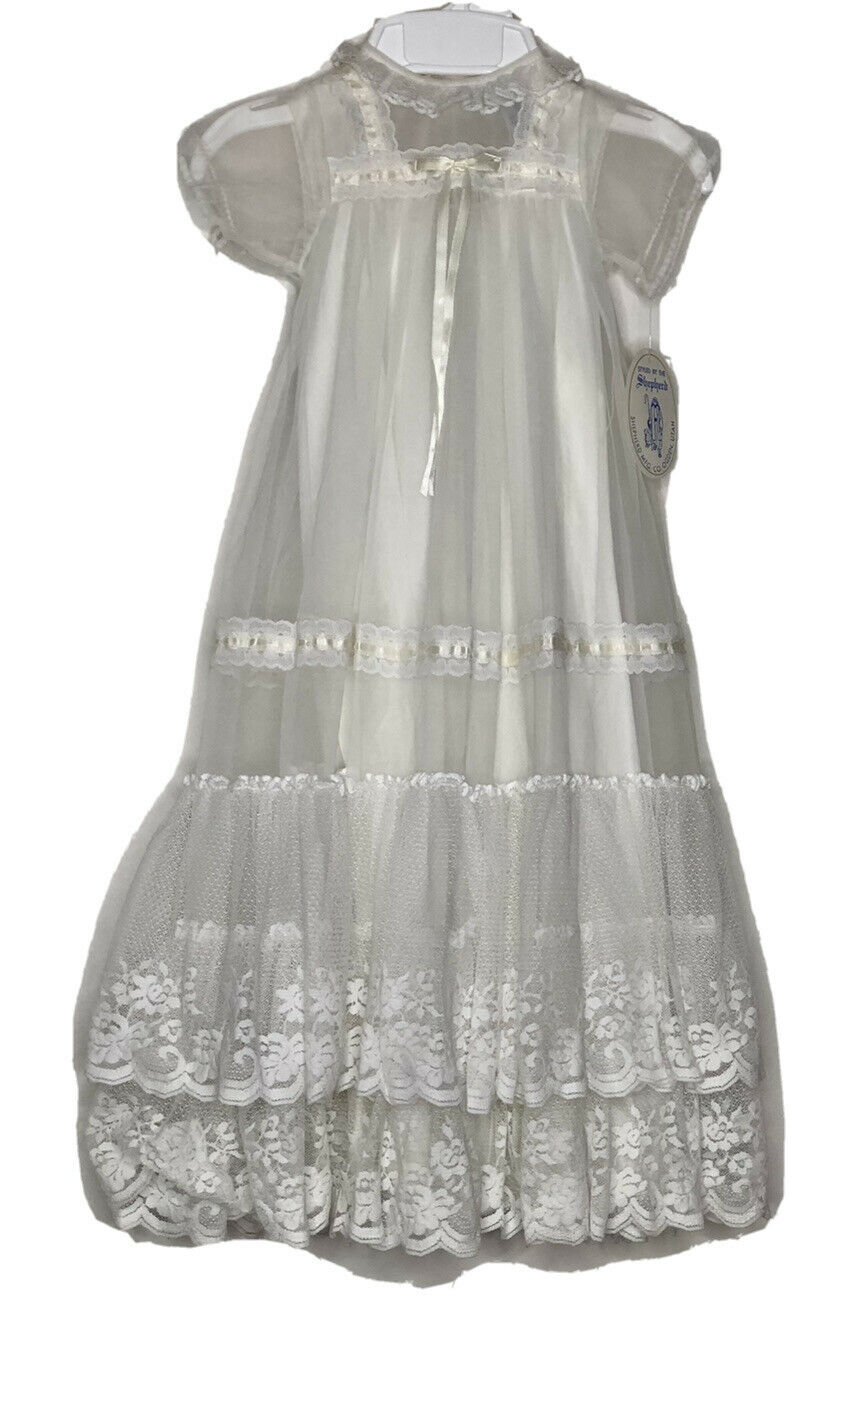 Styled By The Shepherd Baptism Christening Gown, Dress With Slip. Size Small